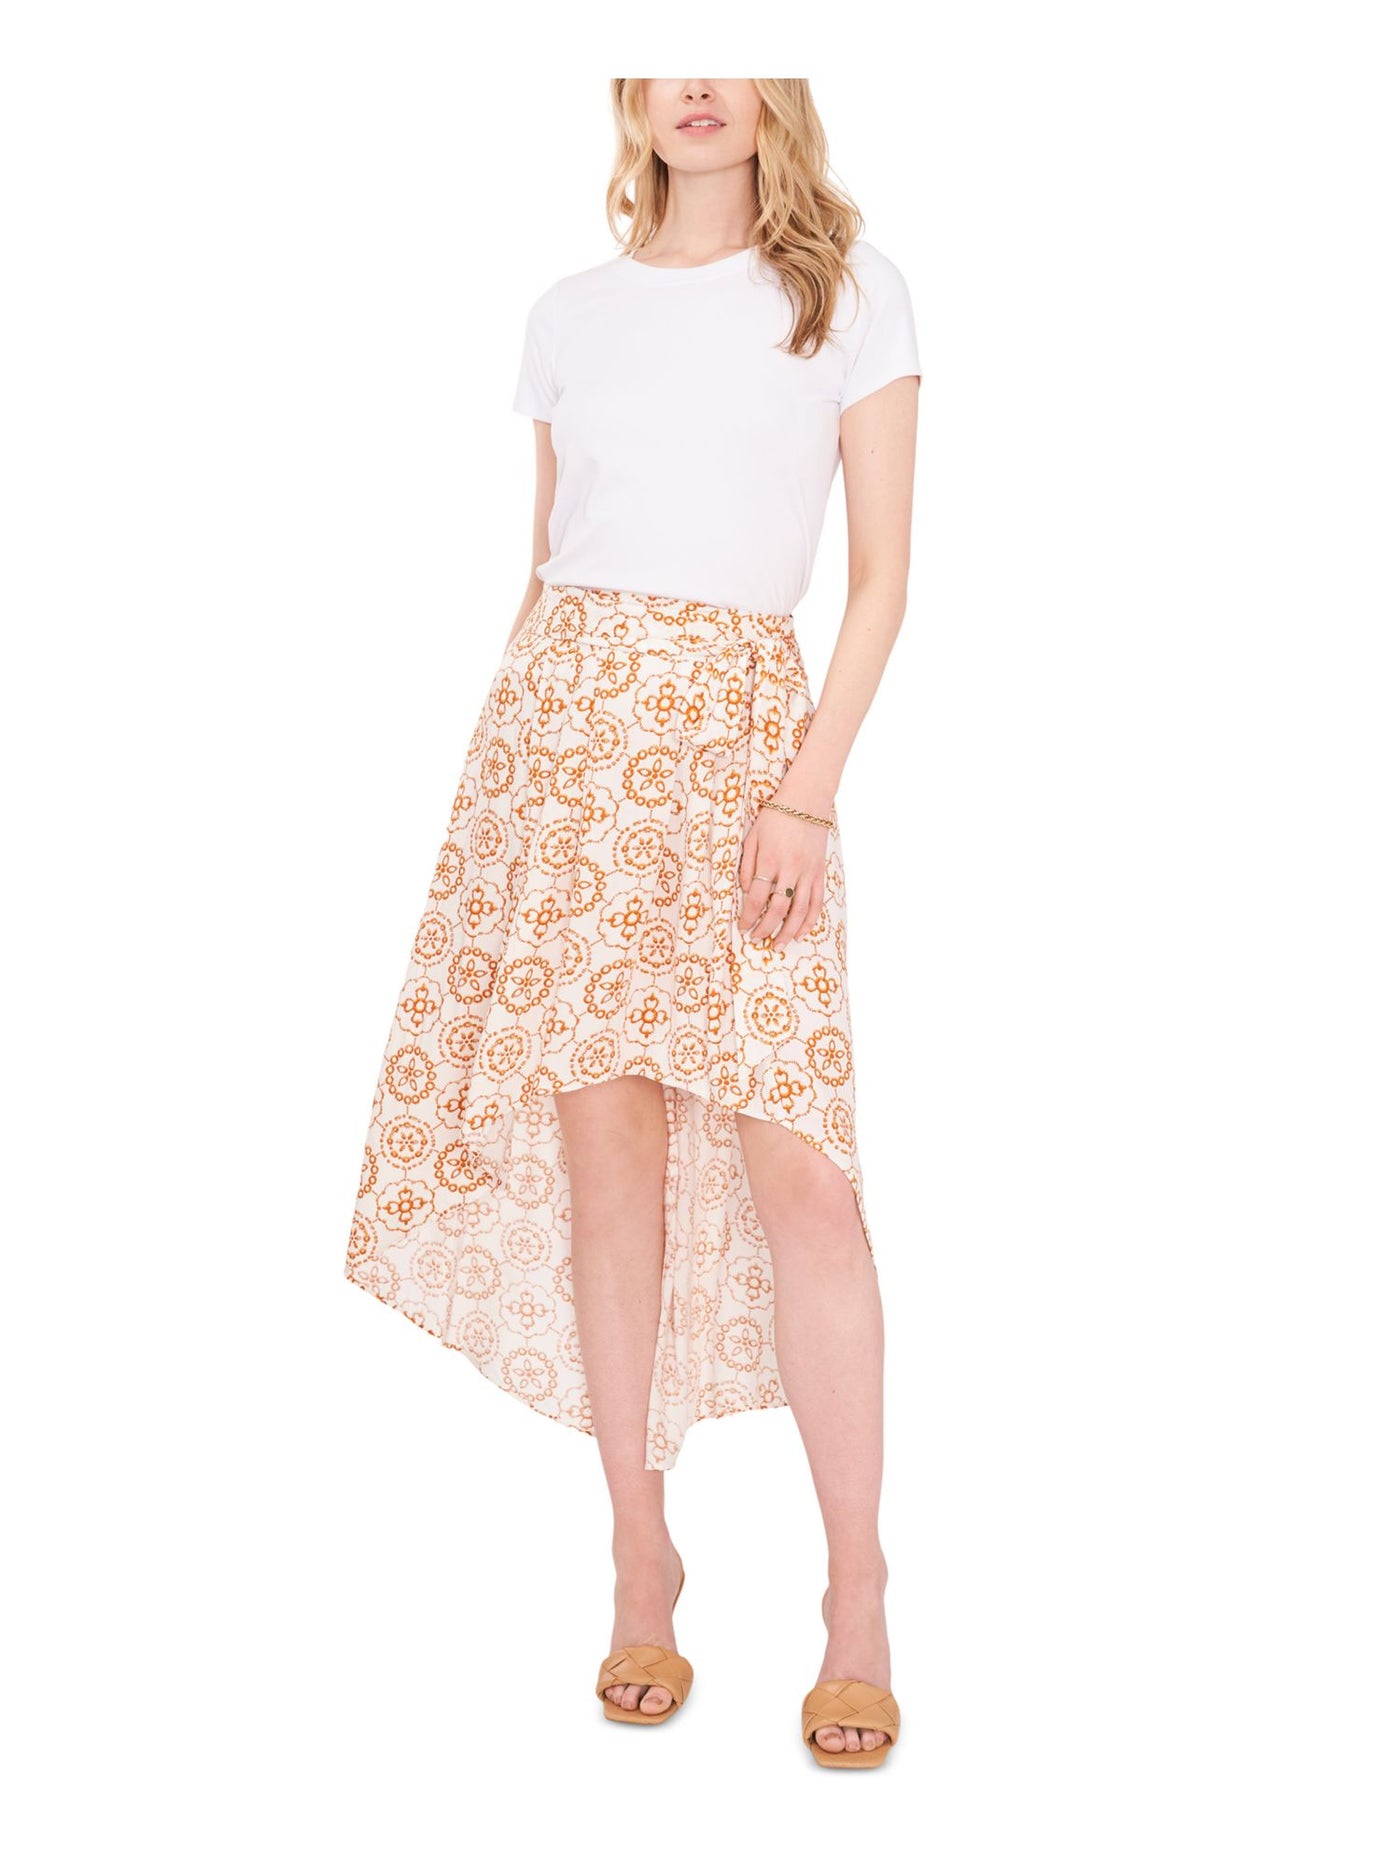 VINCE CAMUTO Womens White Printed Above The Knee Hi-Lo Skirt XS